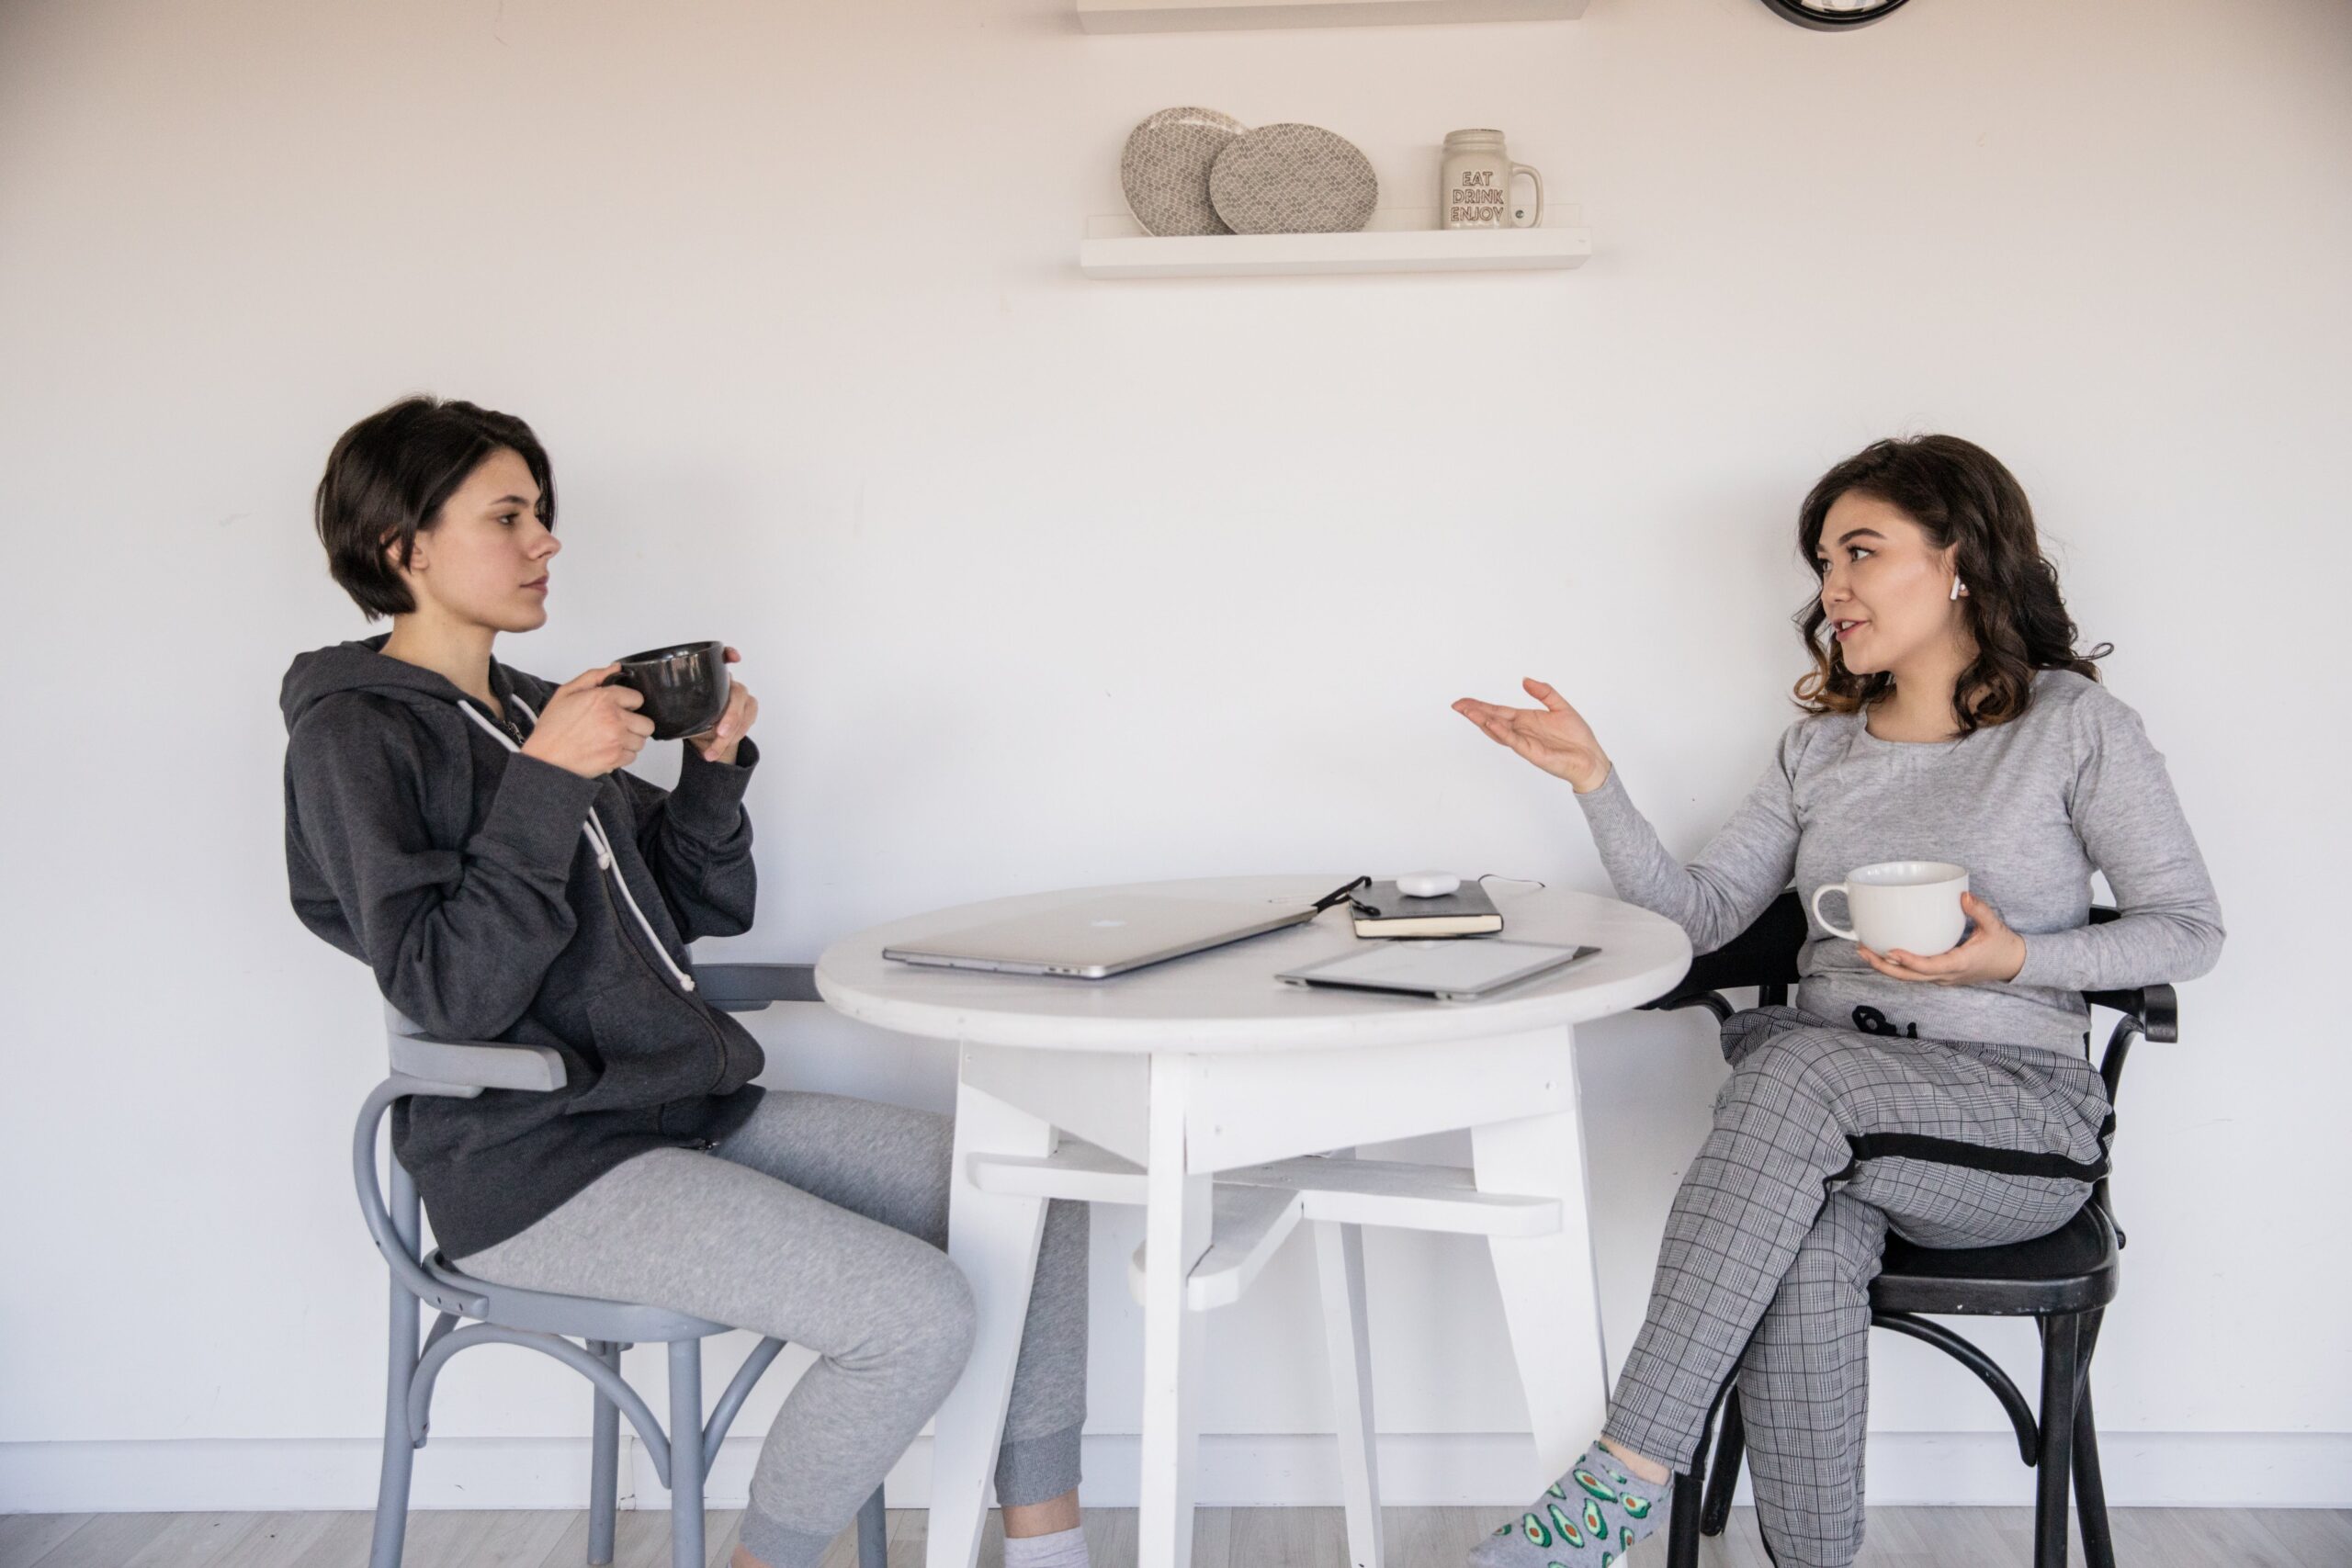 Two women talk over coffee, highlighting the importance of Communication skills in addiction recovery